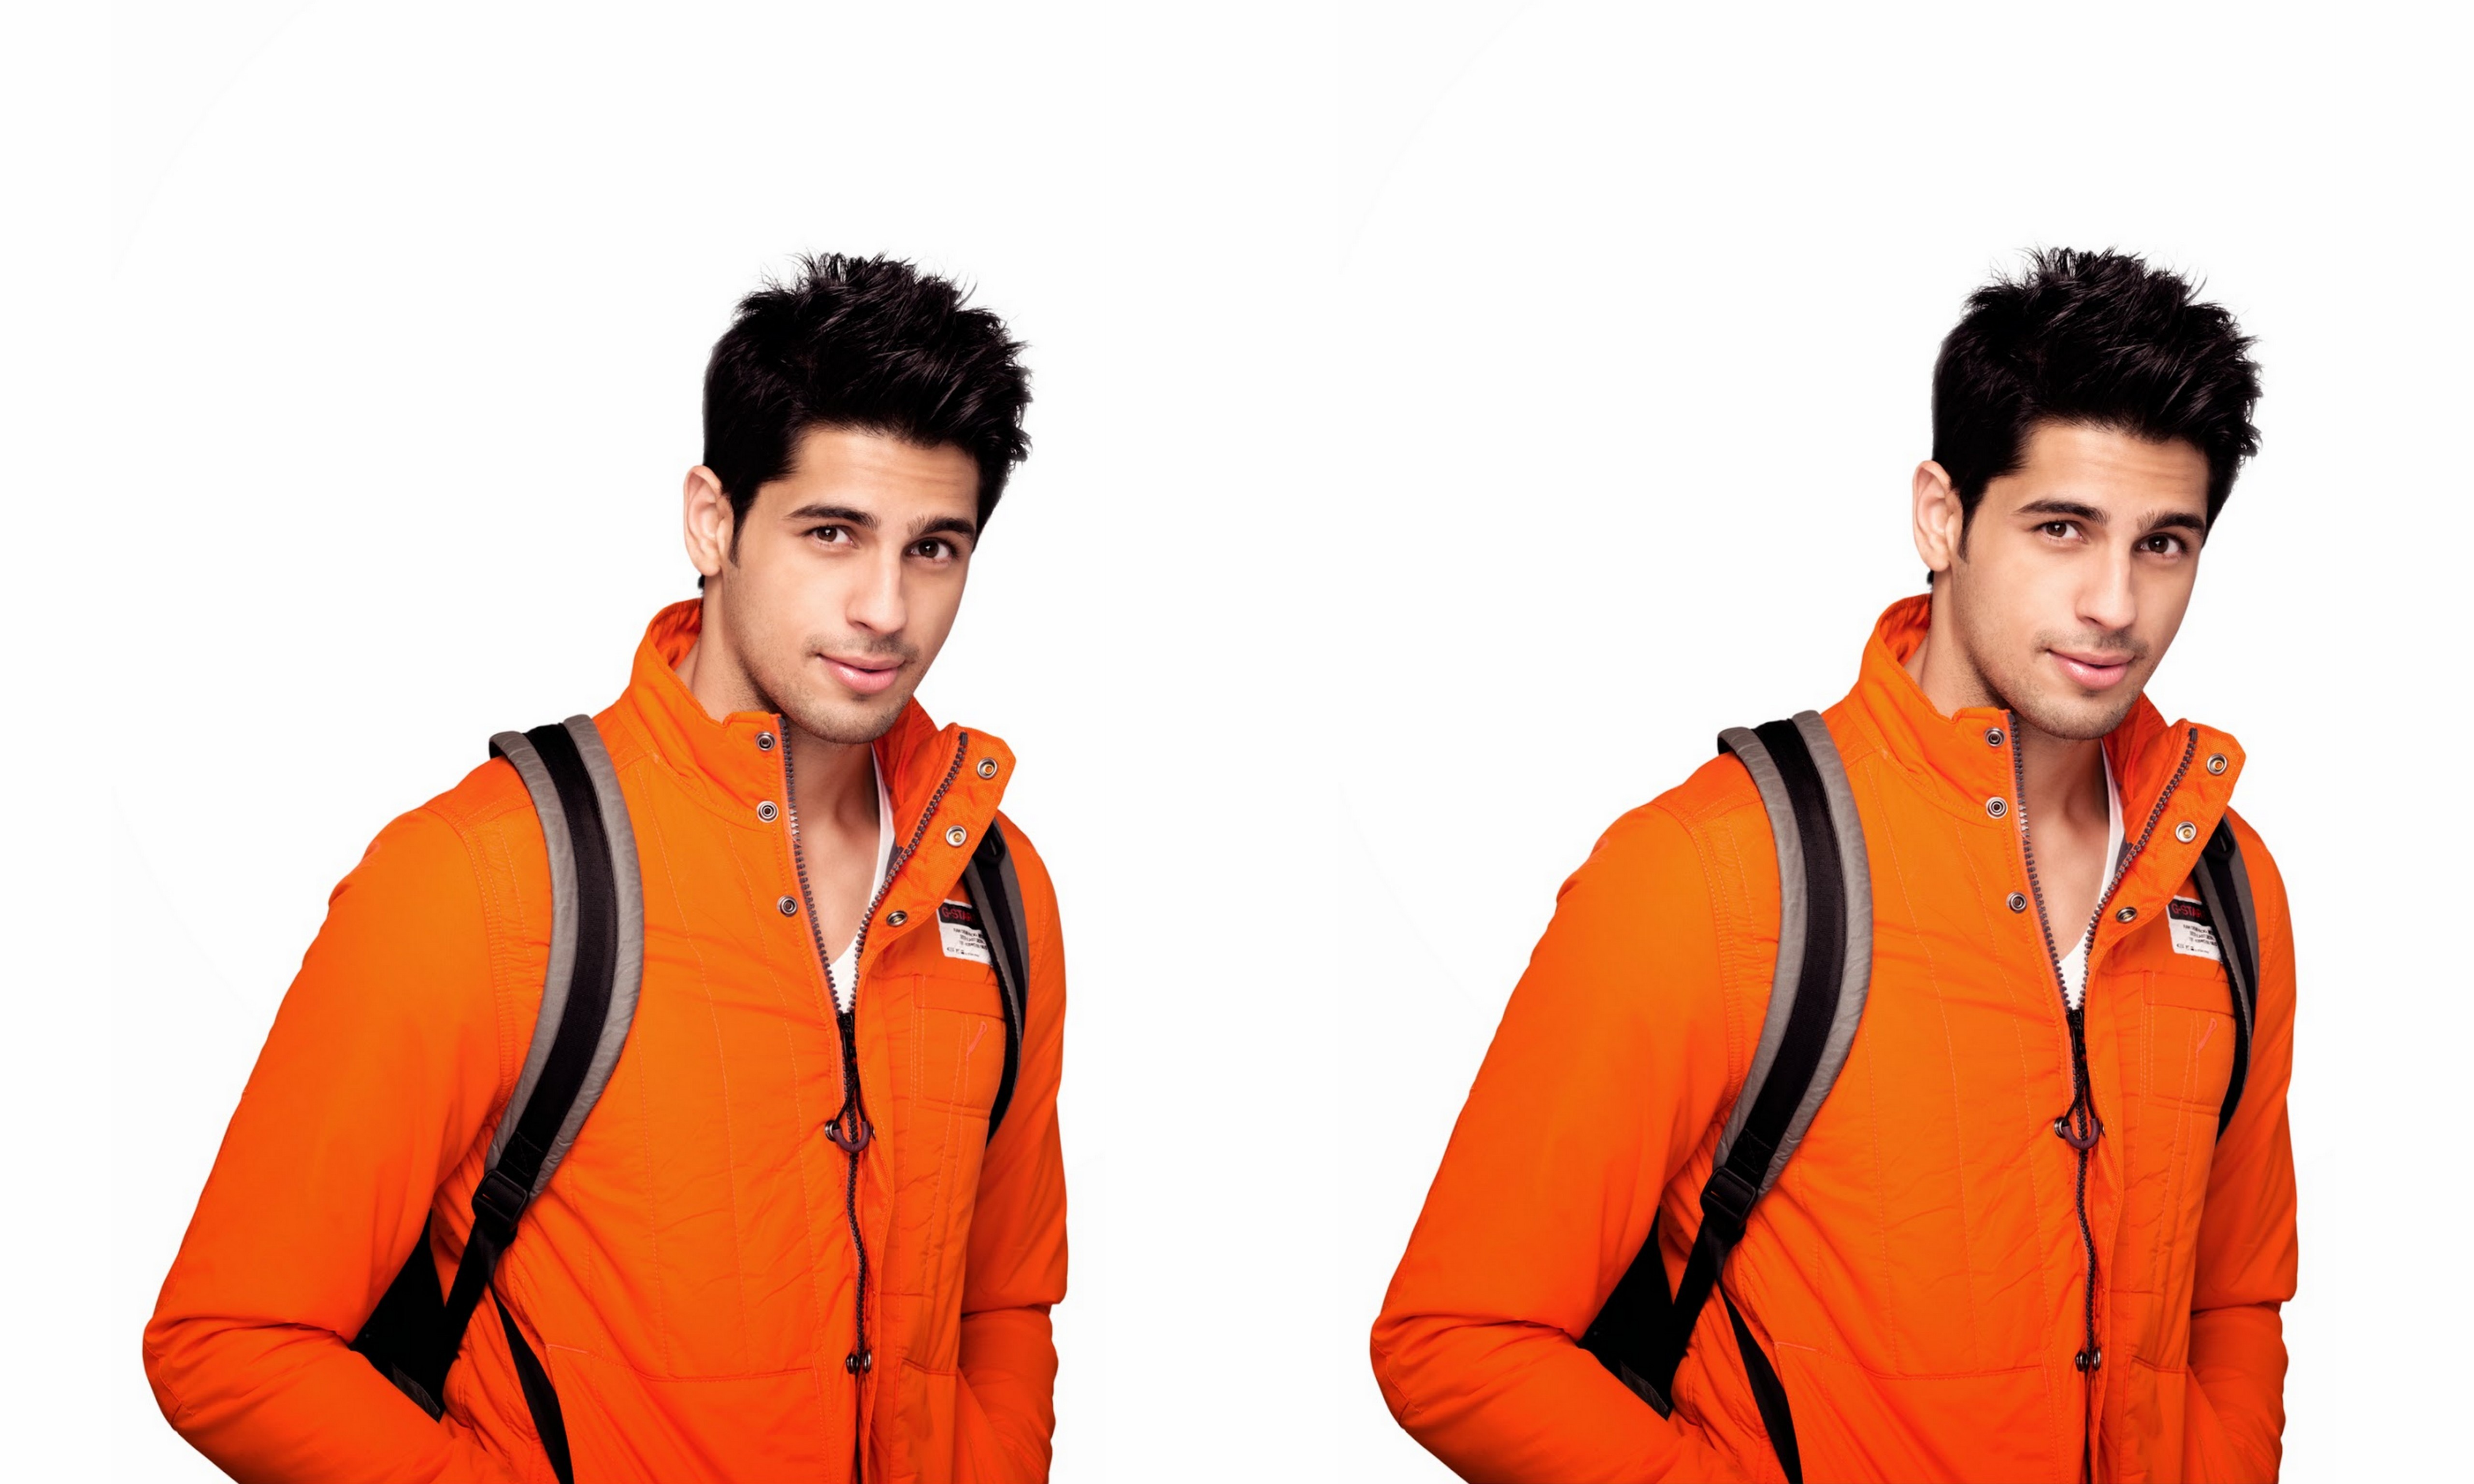 'A Gentleman' was 'very fulfilling' for me: Sidharth Malhotra!